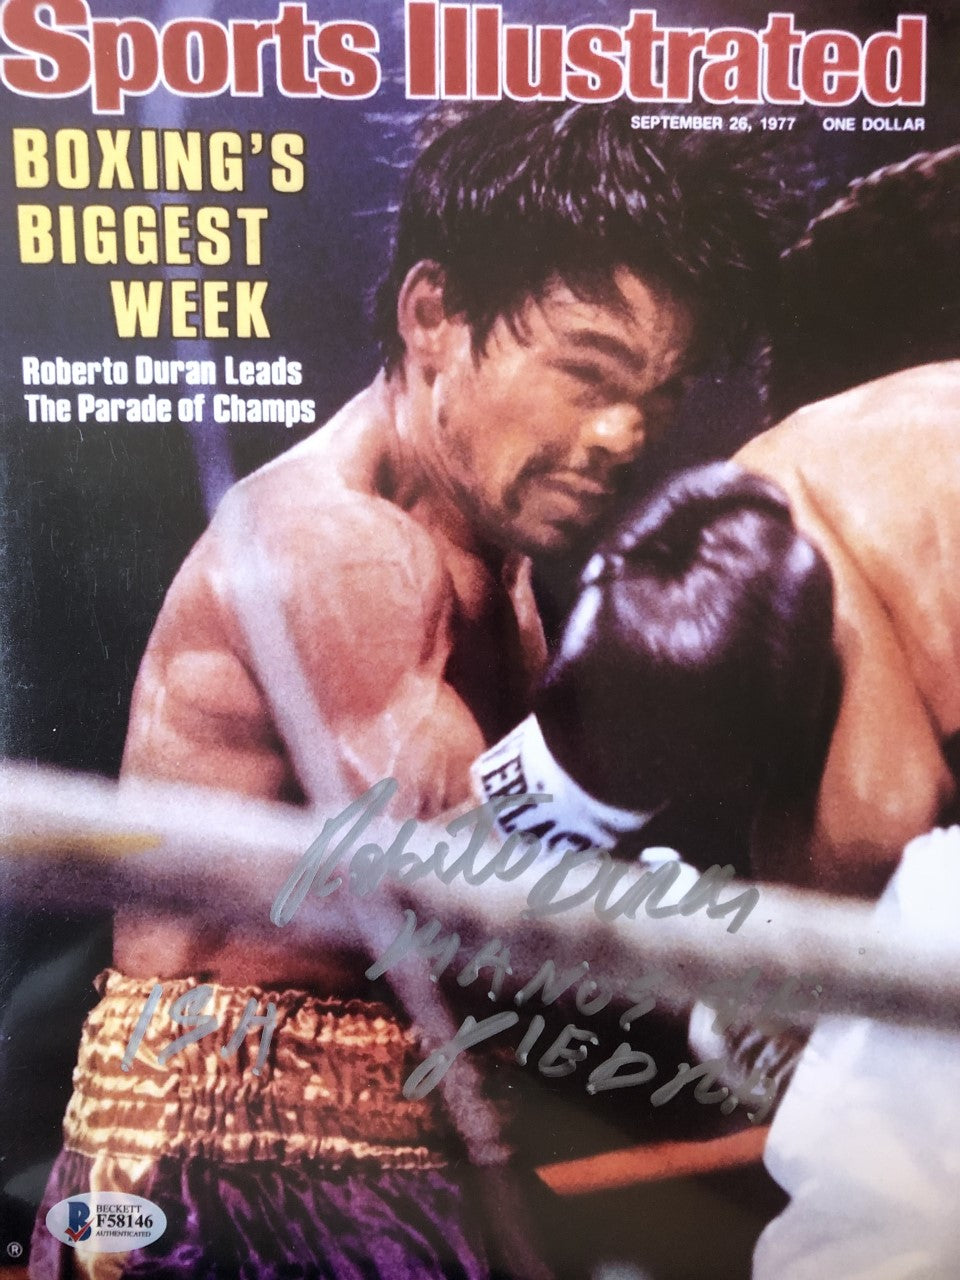 Roberto Duran Hands of stone Inscription Autographed Boxing Photo Signed Beckett Cert